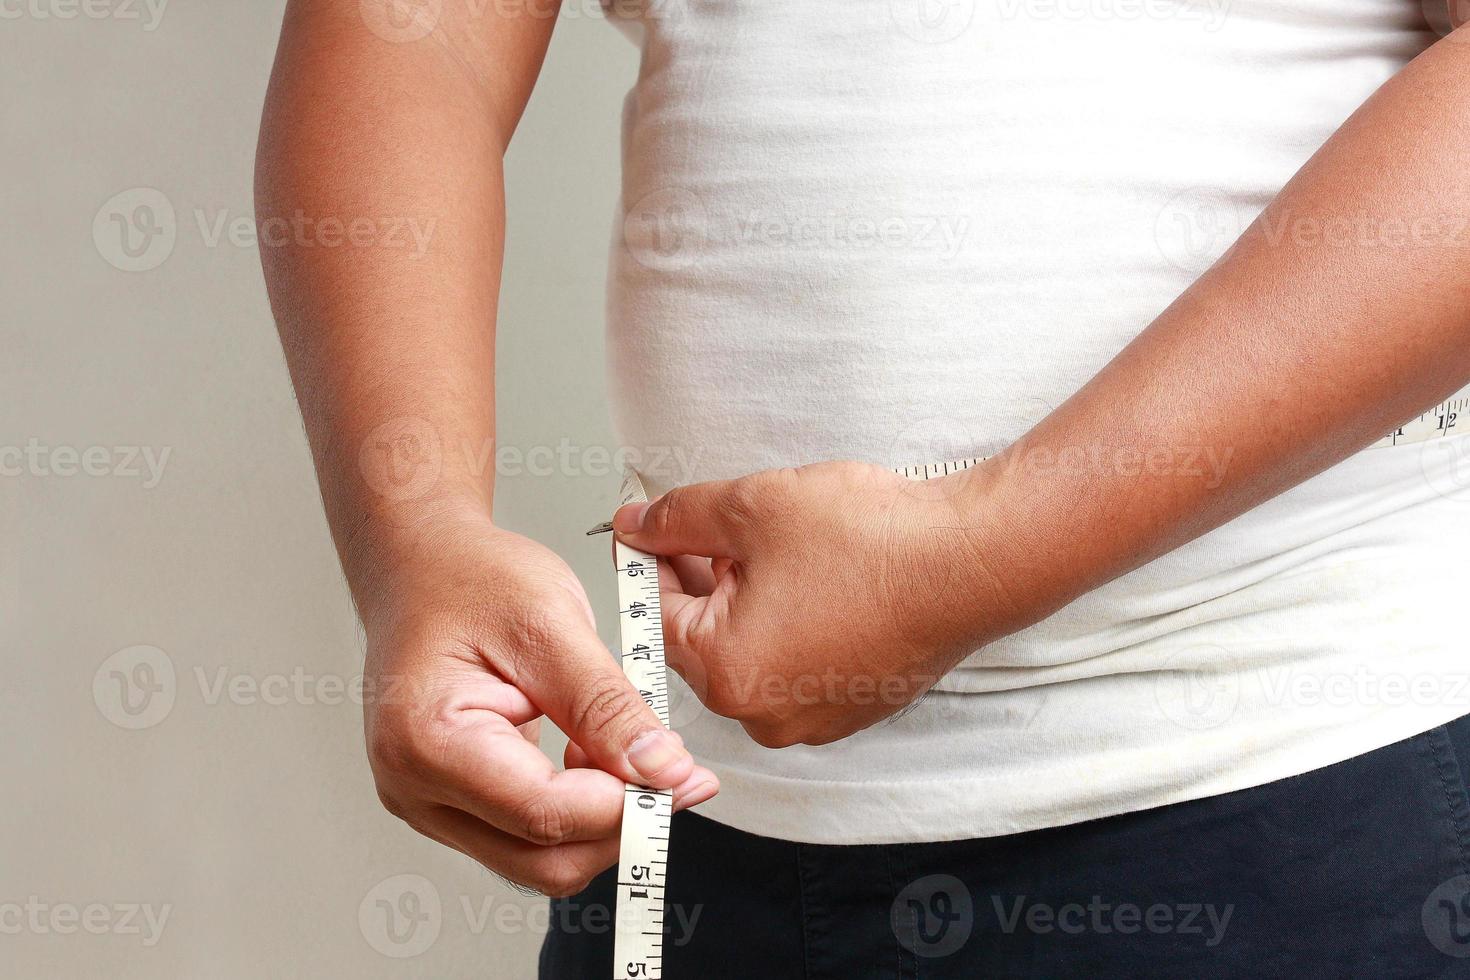 Measure the fat around the belly fat man. photo